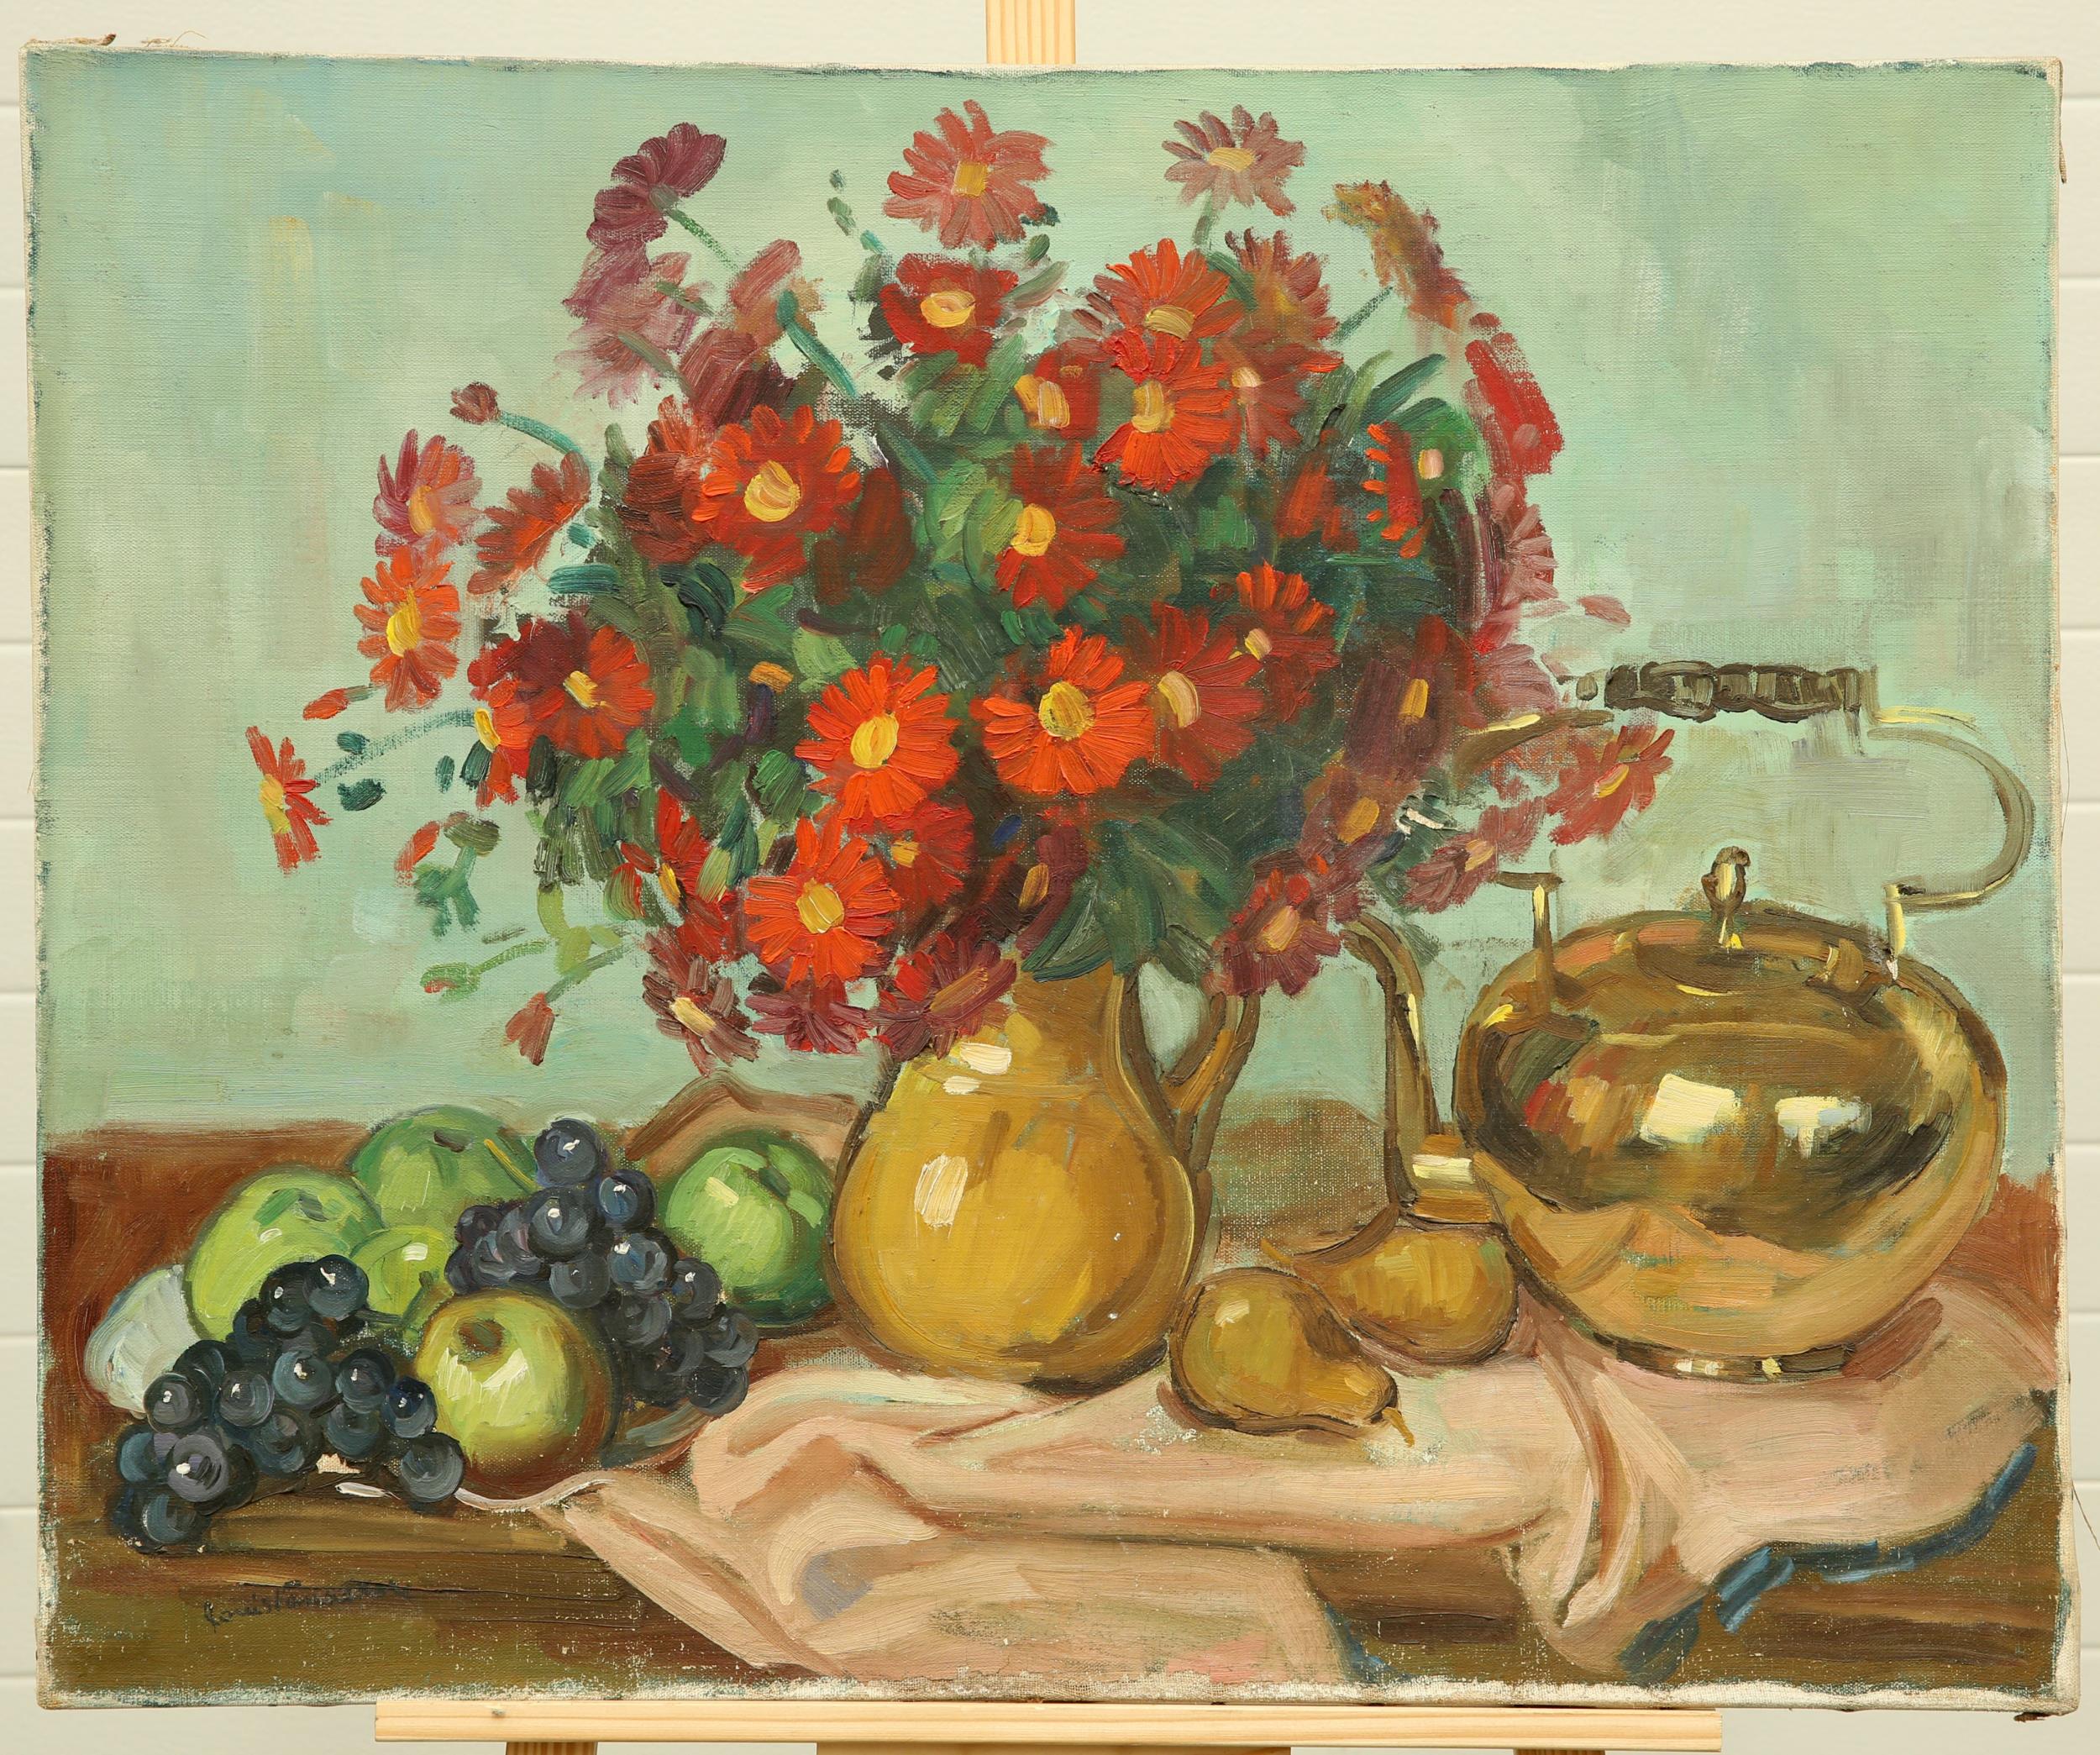 CONTINENTAL SCHOOL, STILL LIFE OF A VASE OF FLOWERS, FRUIT AND TEAPOT